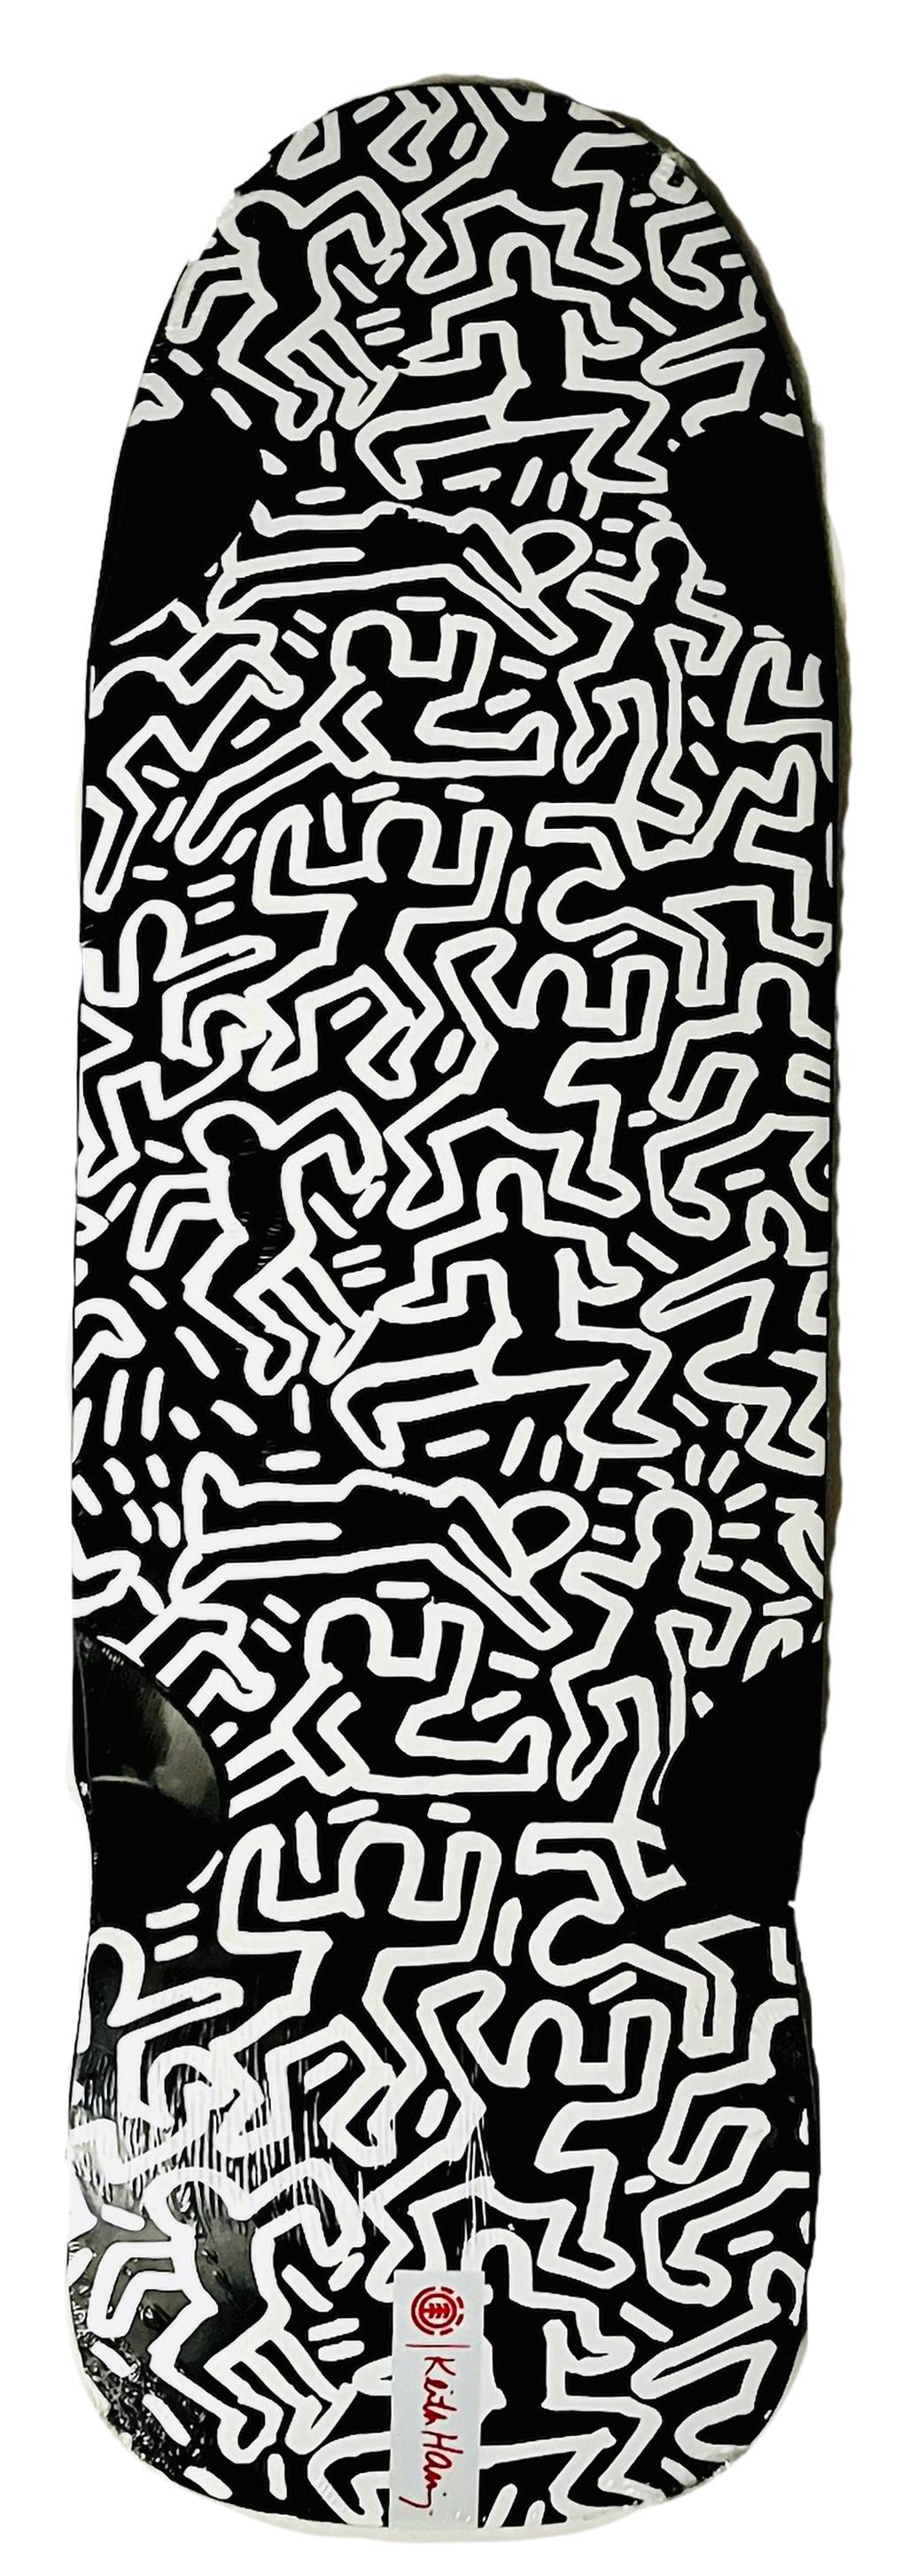 Keith Haring Skateboard Deck (Keith Haring - visage à trois yeux) - Pop Art Sculpture par (after) Keith Haring